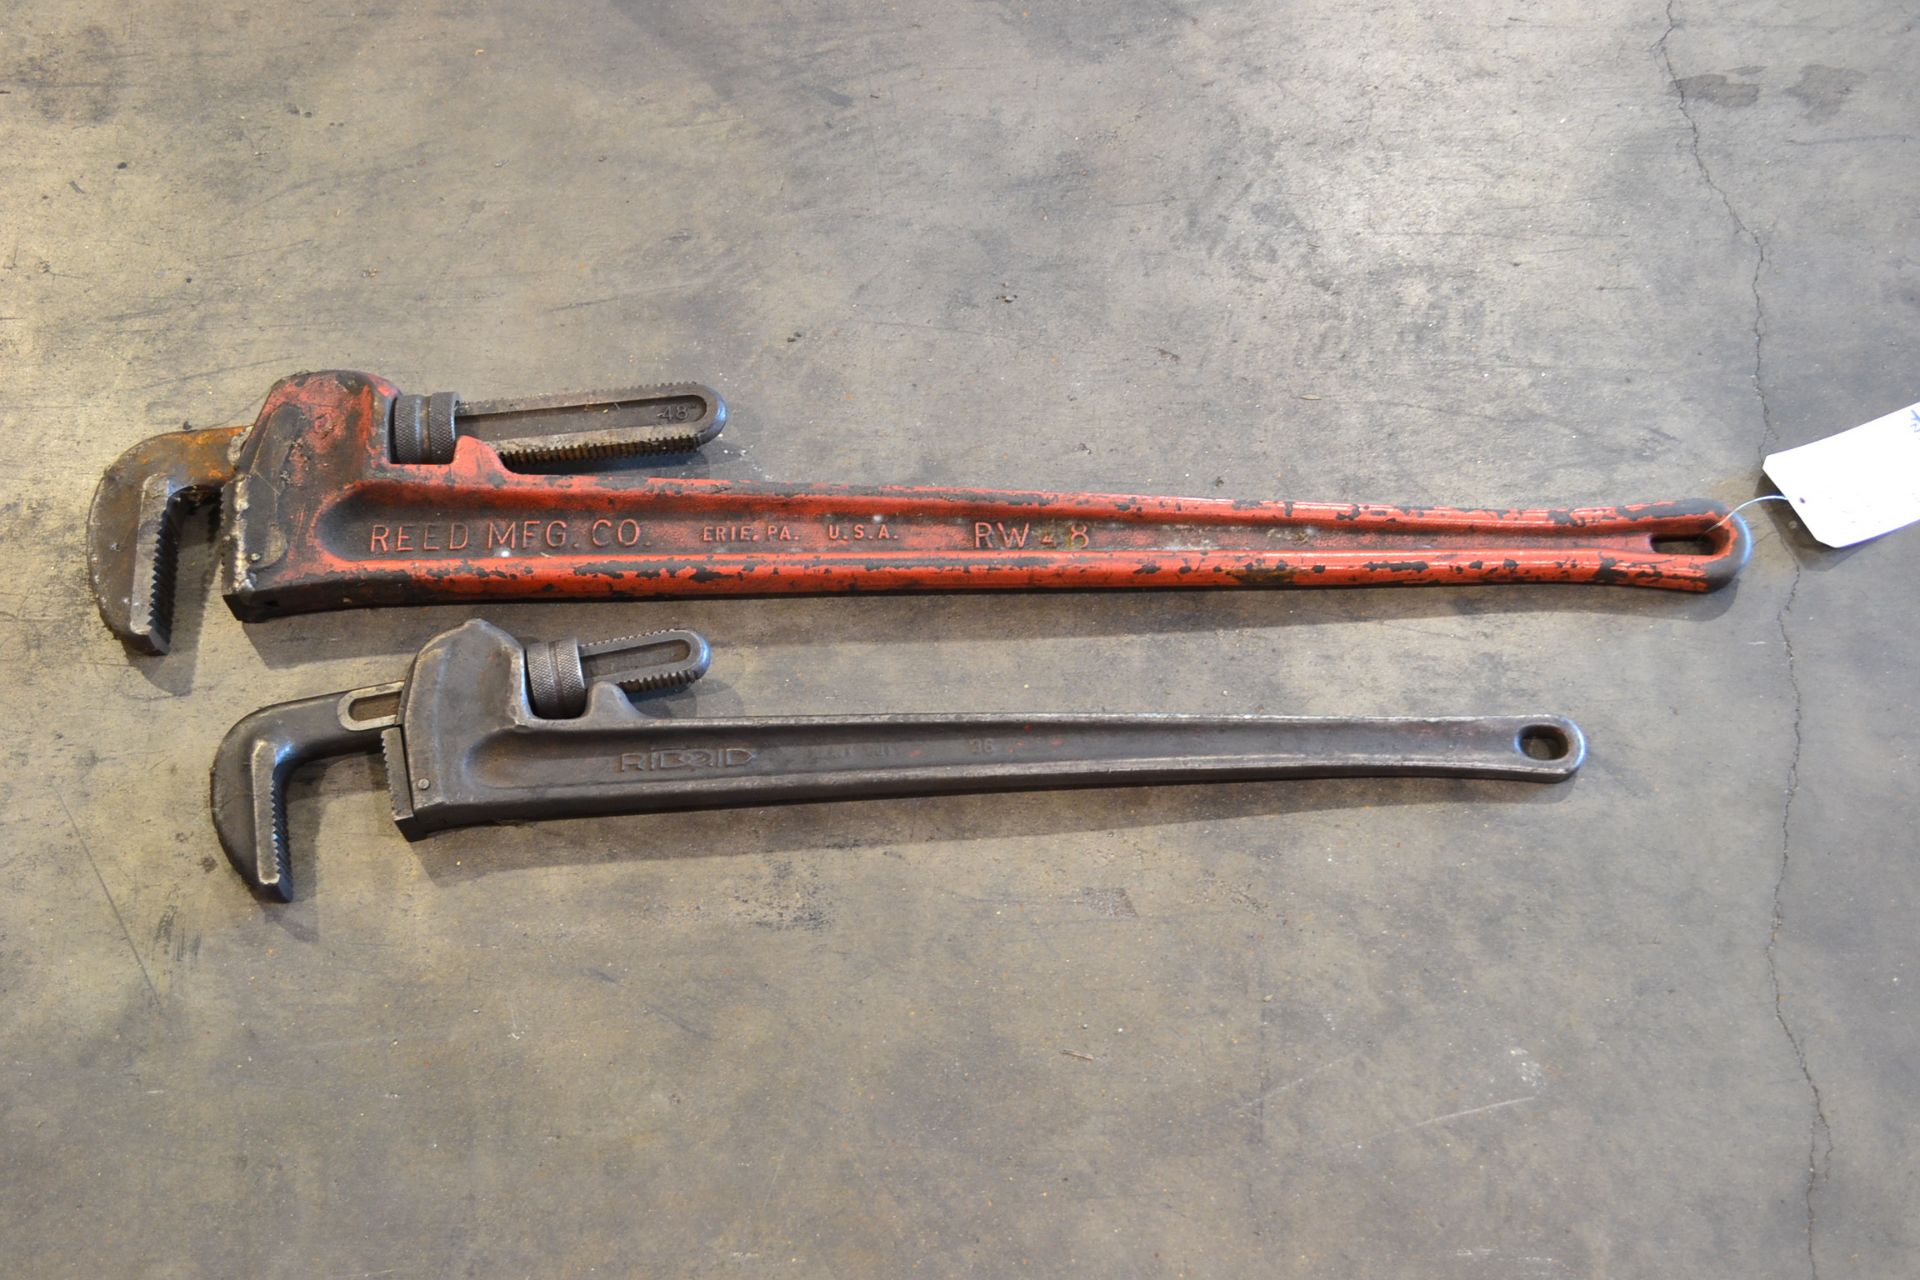 (1) PIPE WRENCH, REED, 48", (1) PIPE WRENCH, 36"